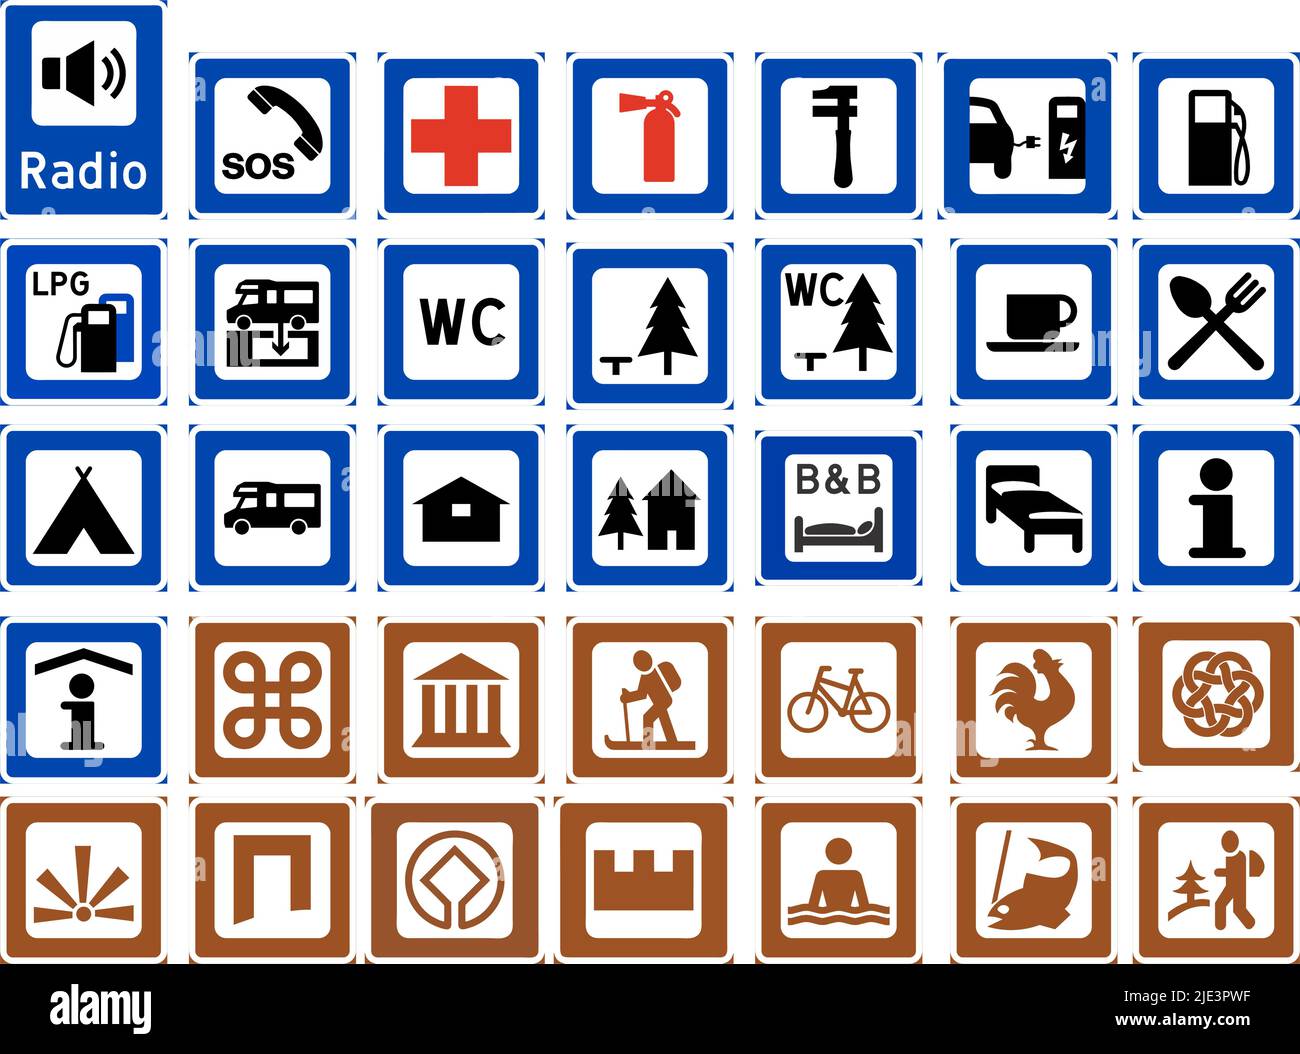 Service signs, Road signs in Norway are regulated by the Norwegian Public Roads Administration, Statens vegvesen. Stock Vector